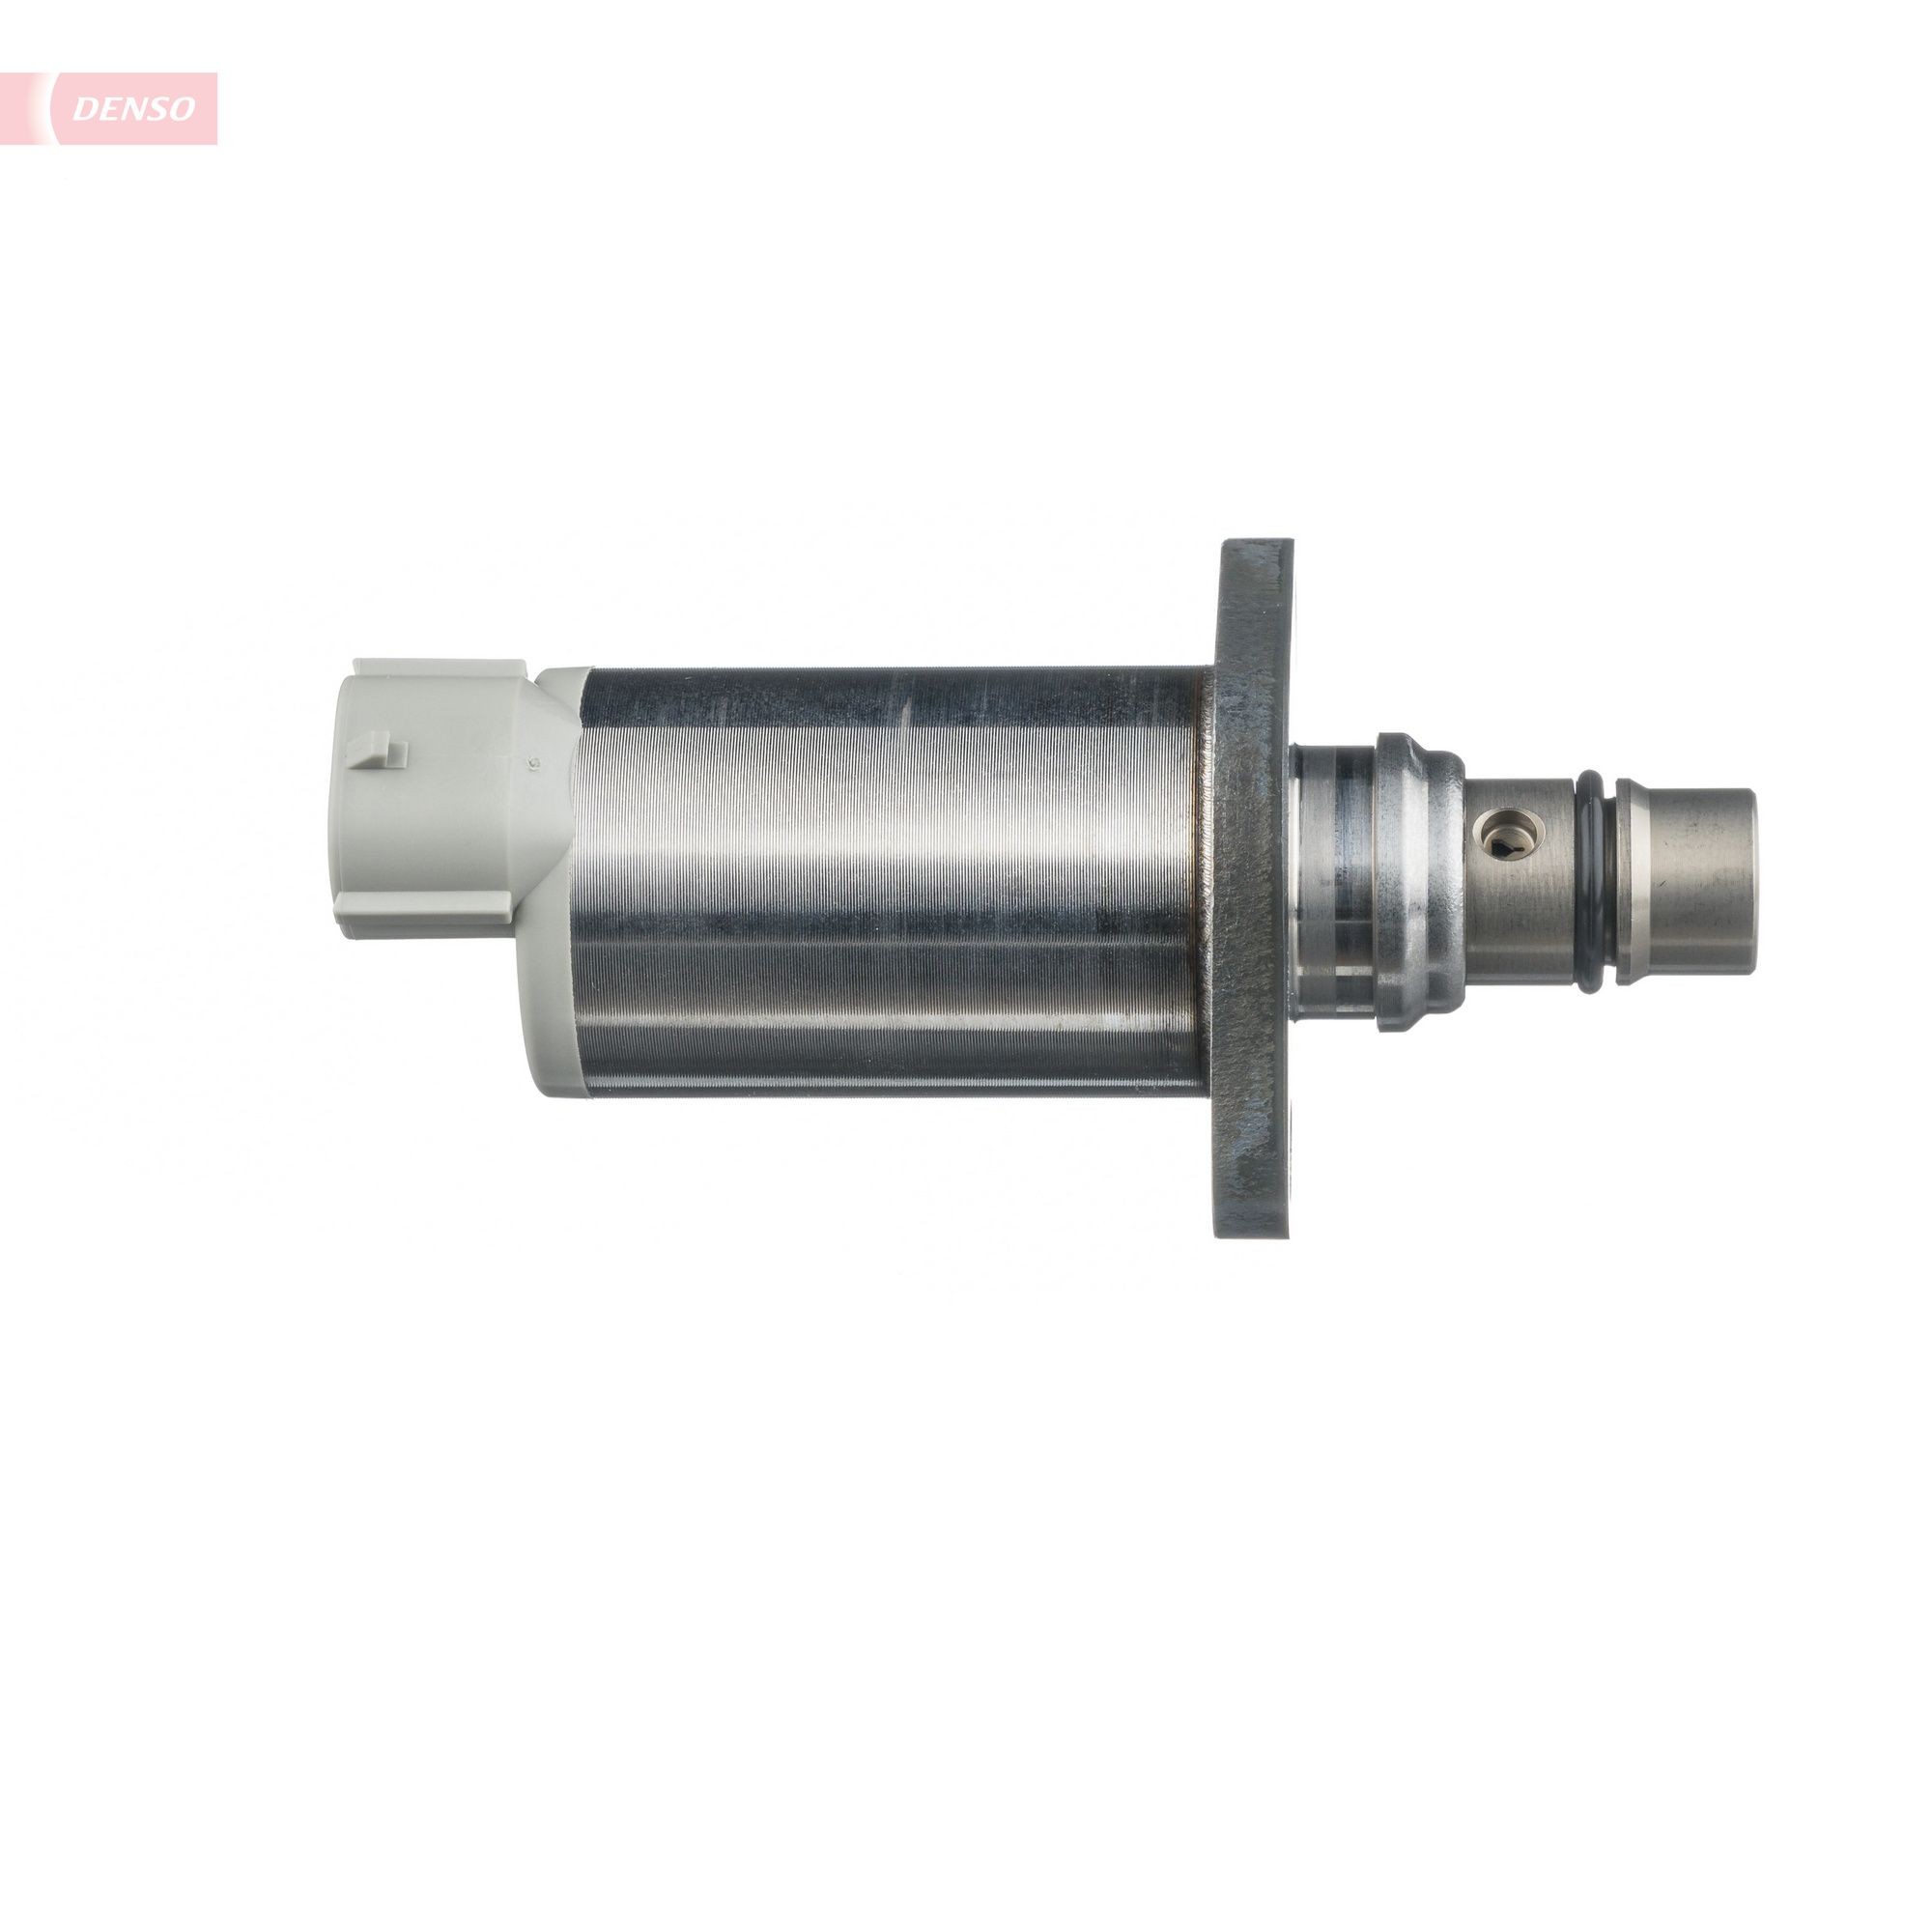 Pressure Control Valve, common rail system DCRS300120 from DENSO